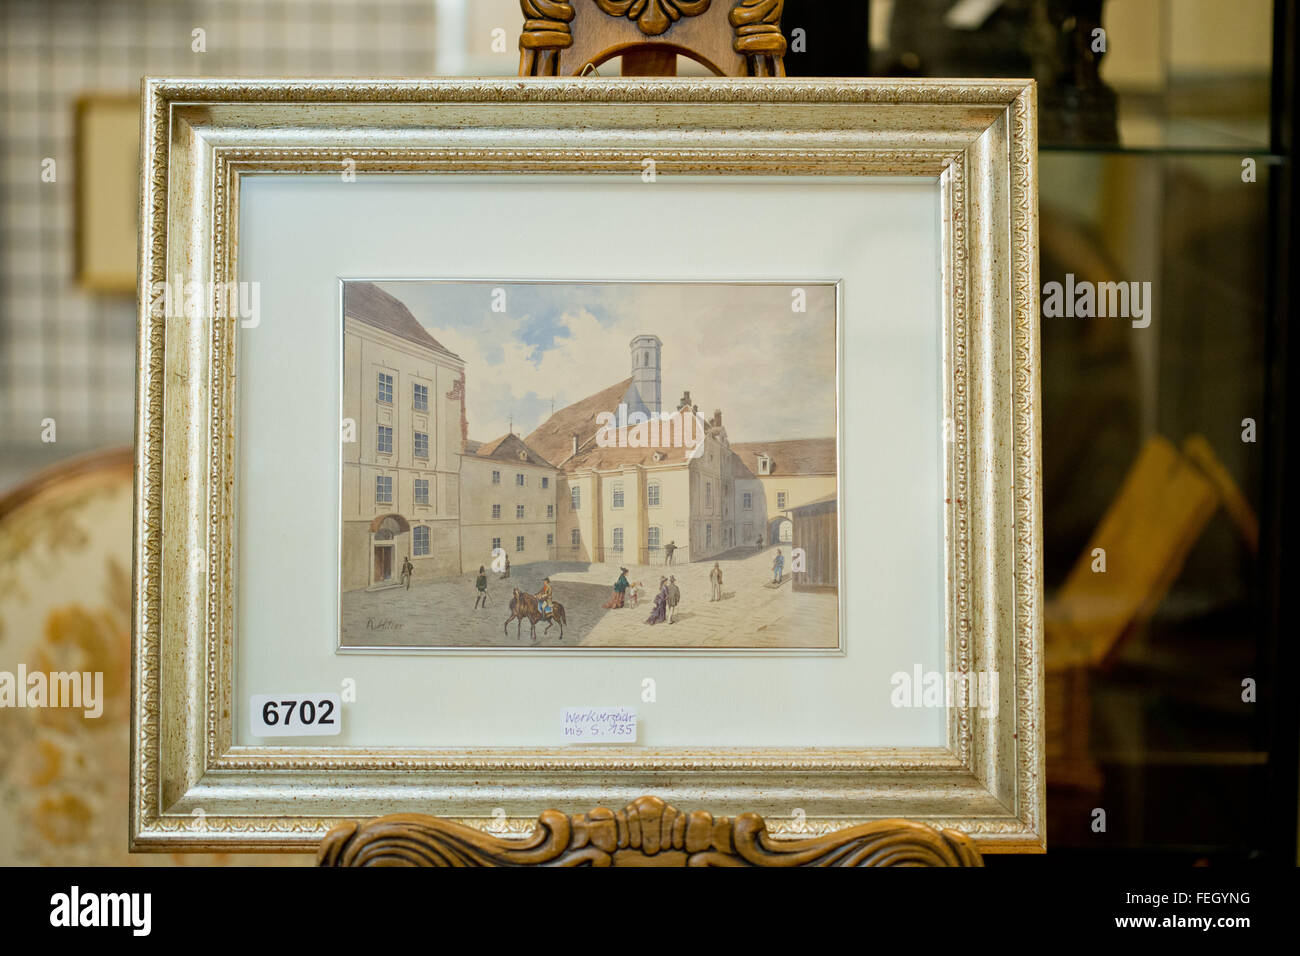 Nuremberg, Germany. 4th Feb, 2016. The water colour painting 'Balle-Platz', between 1910-1912, which is attributed to Adolf Hitler as author, is presented at an auctioneer in Nuremberg, Germany, 4 February 2016. A total of 29 paintings and drawings, attributed to Adolf Hitler, have been auctioned off at Weidler actioneers in Nuremberg on 6 February 2016. Photo: Daniel Karmann/dpa/Alamy Live News Stock Photo